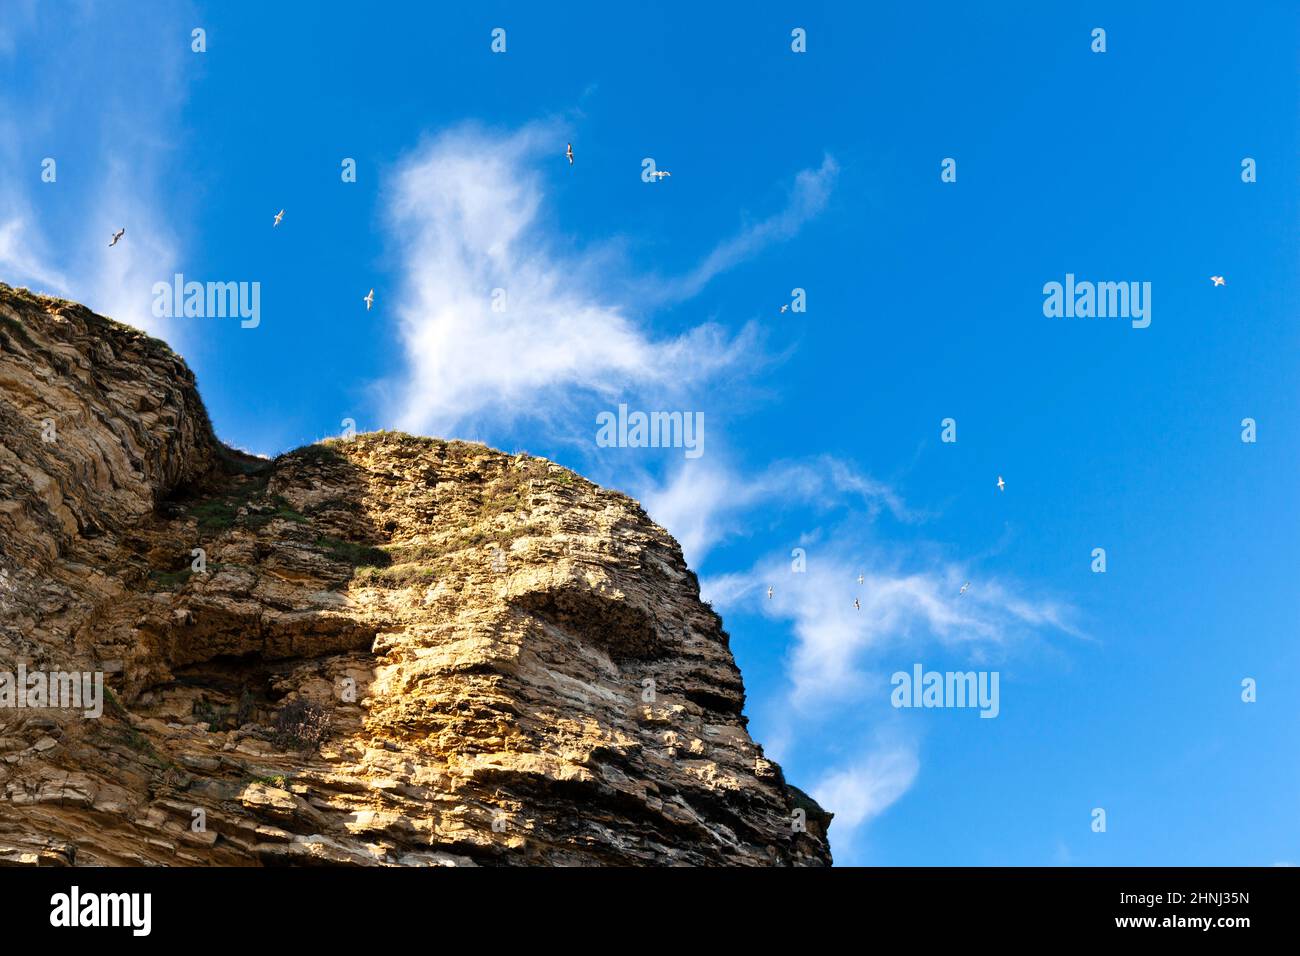 Seagulls fly over a cliff against a blue sky Stock Photo